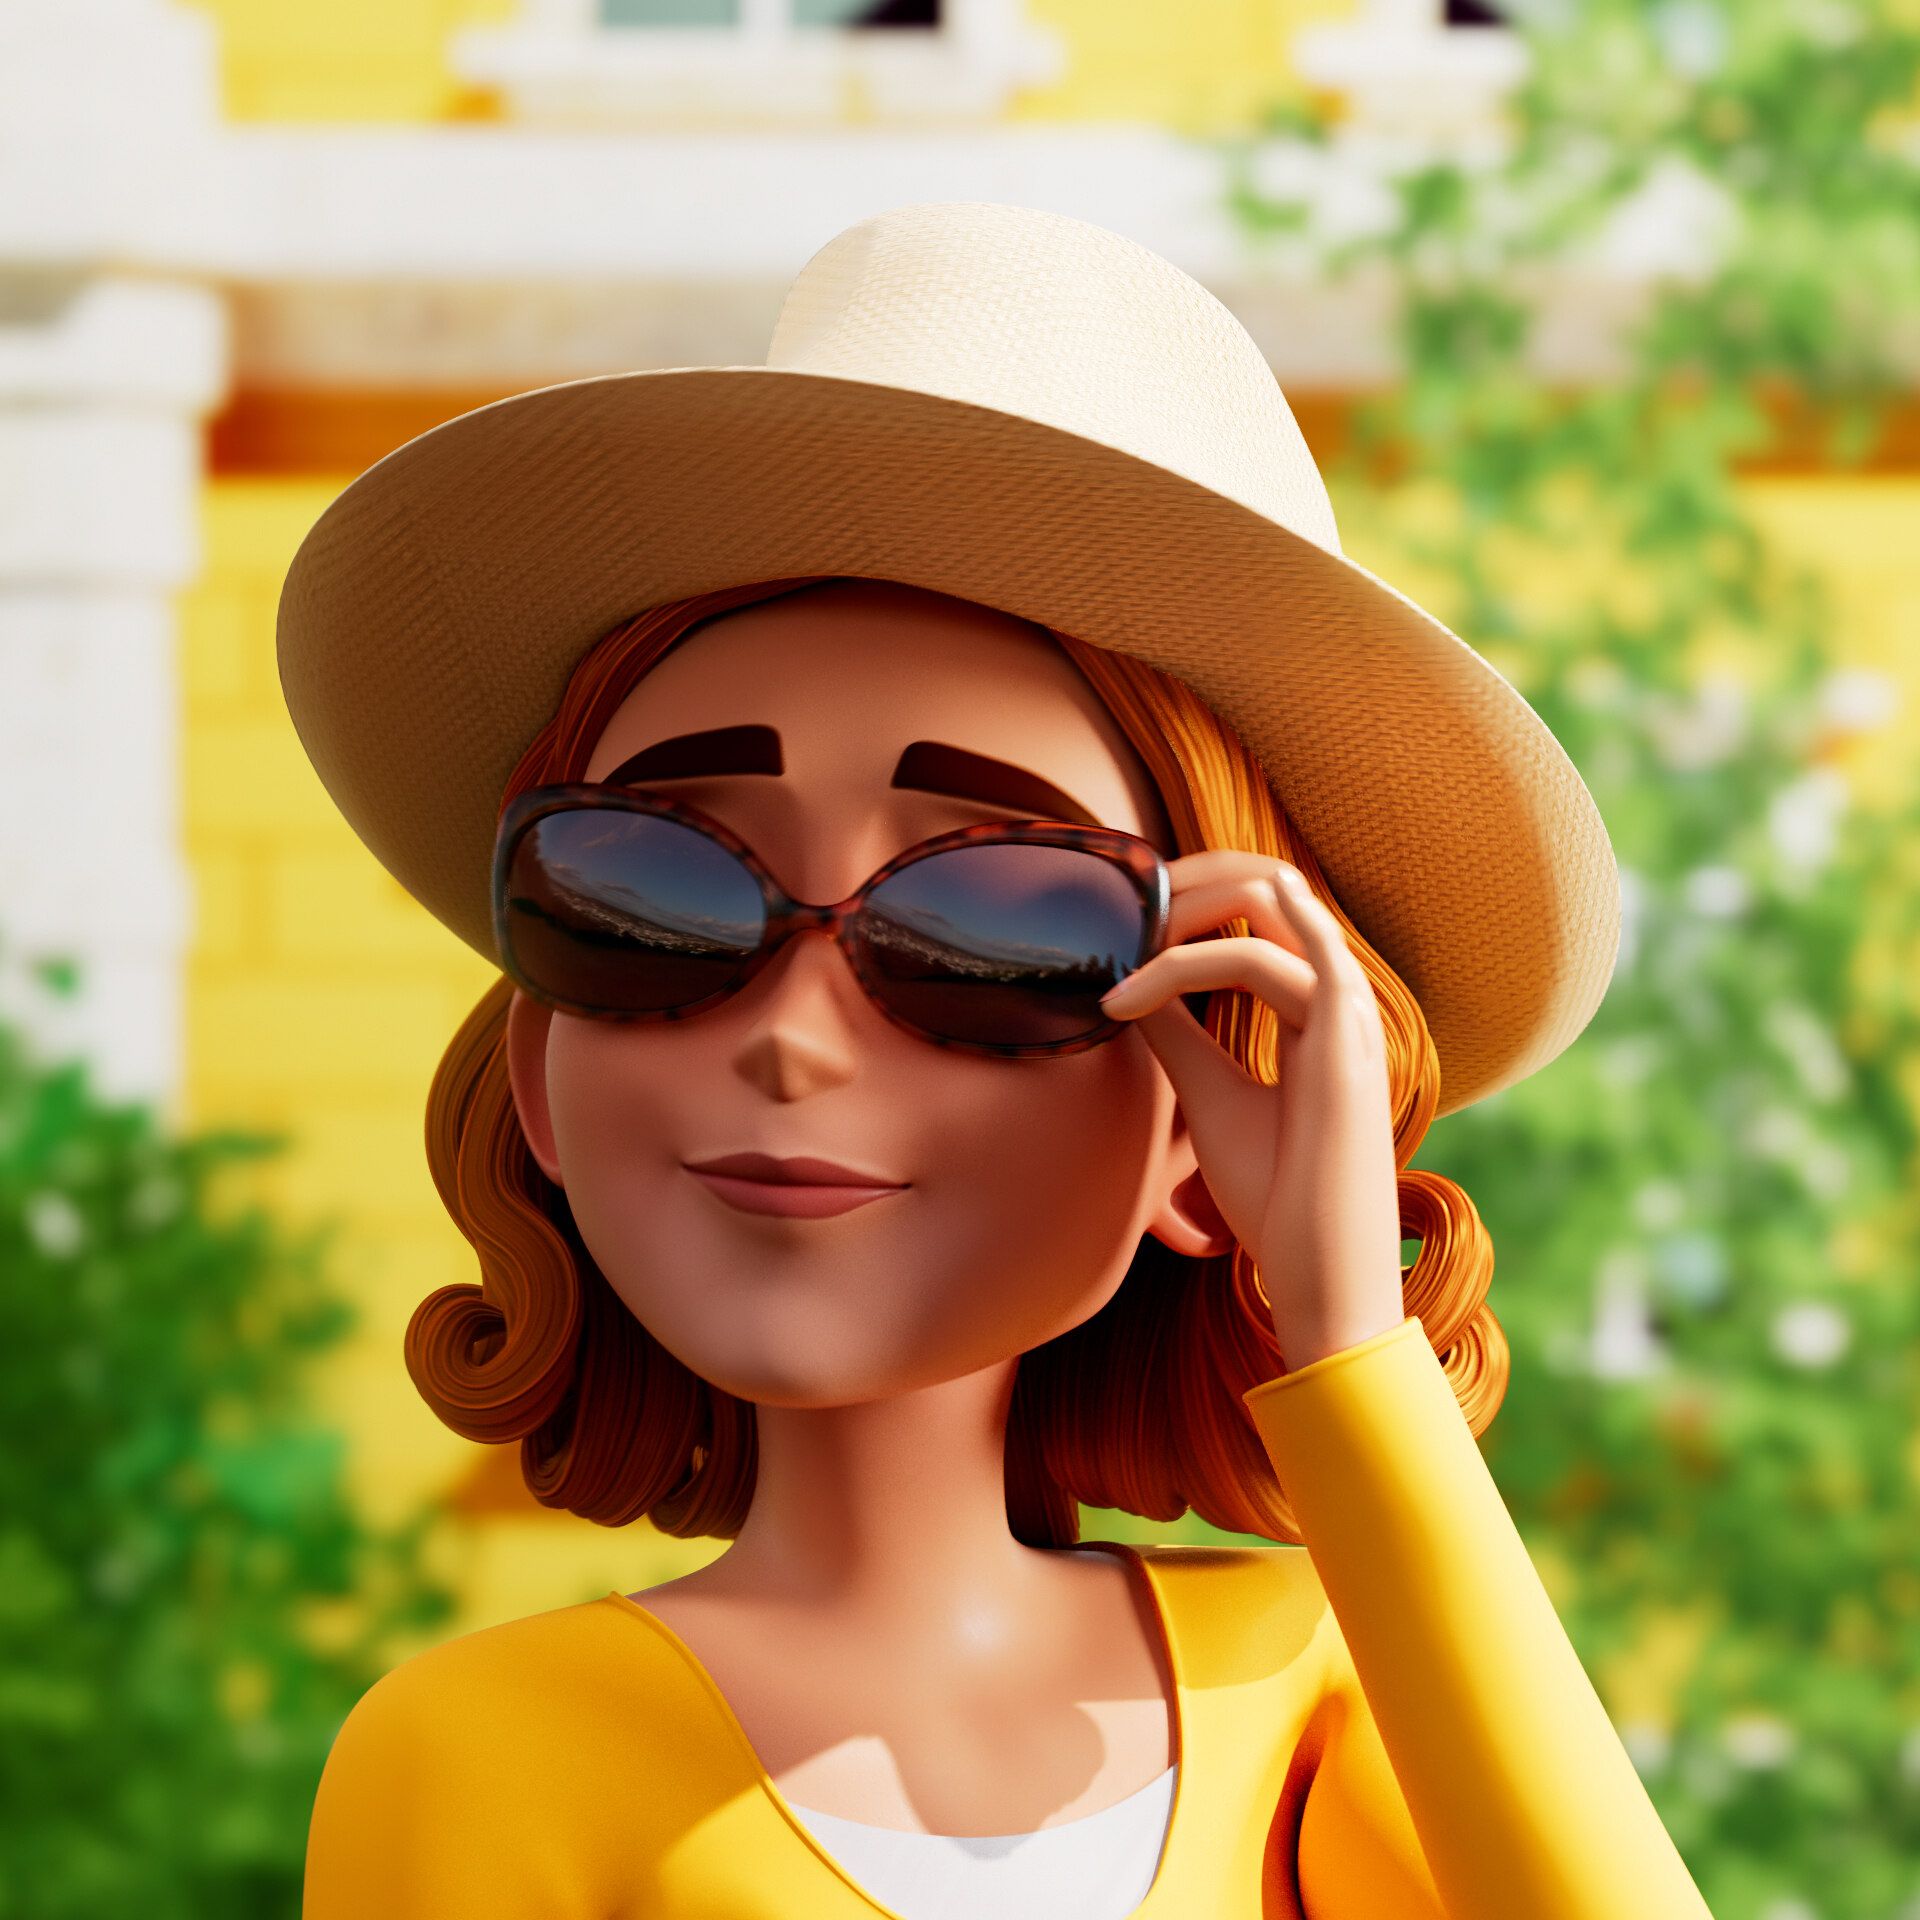 Maddie wearing a sun hat and sunglasses